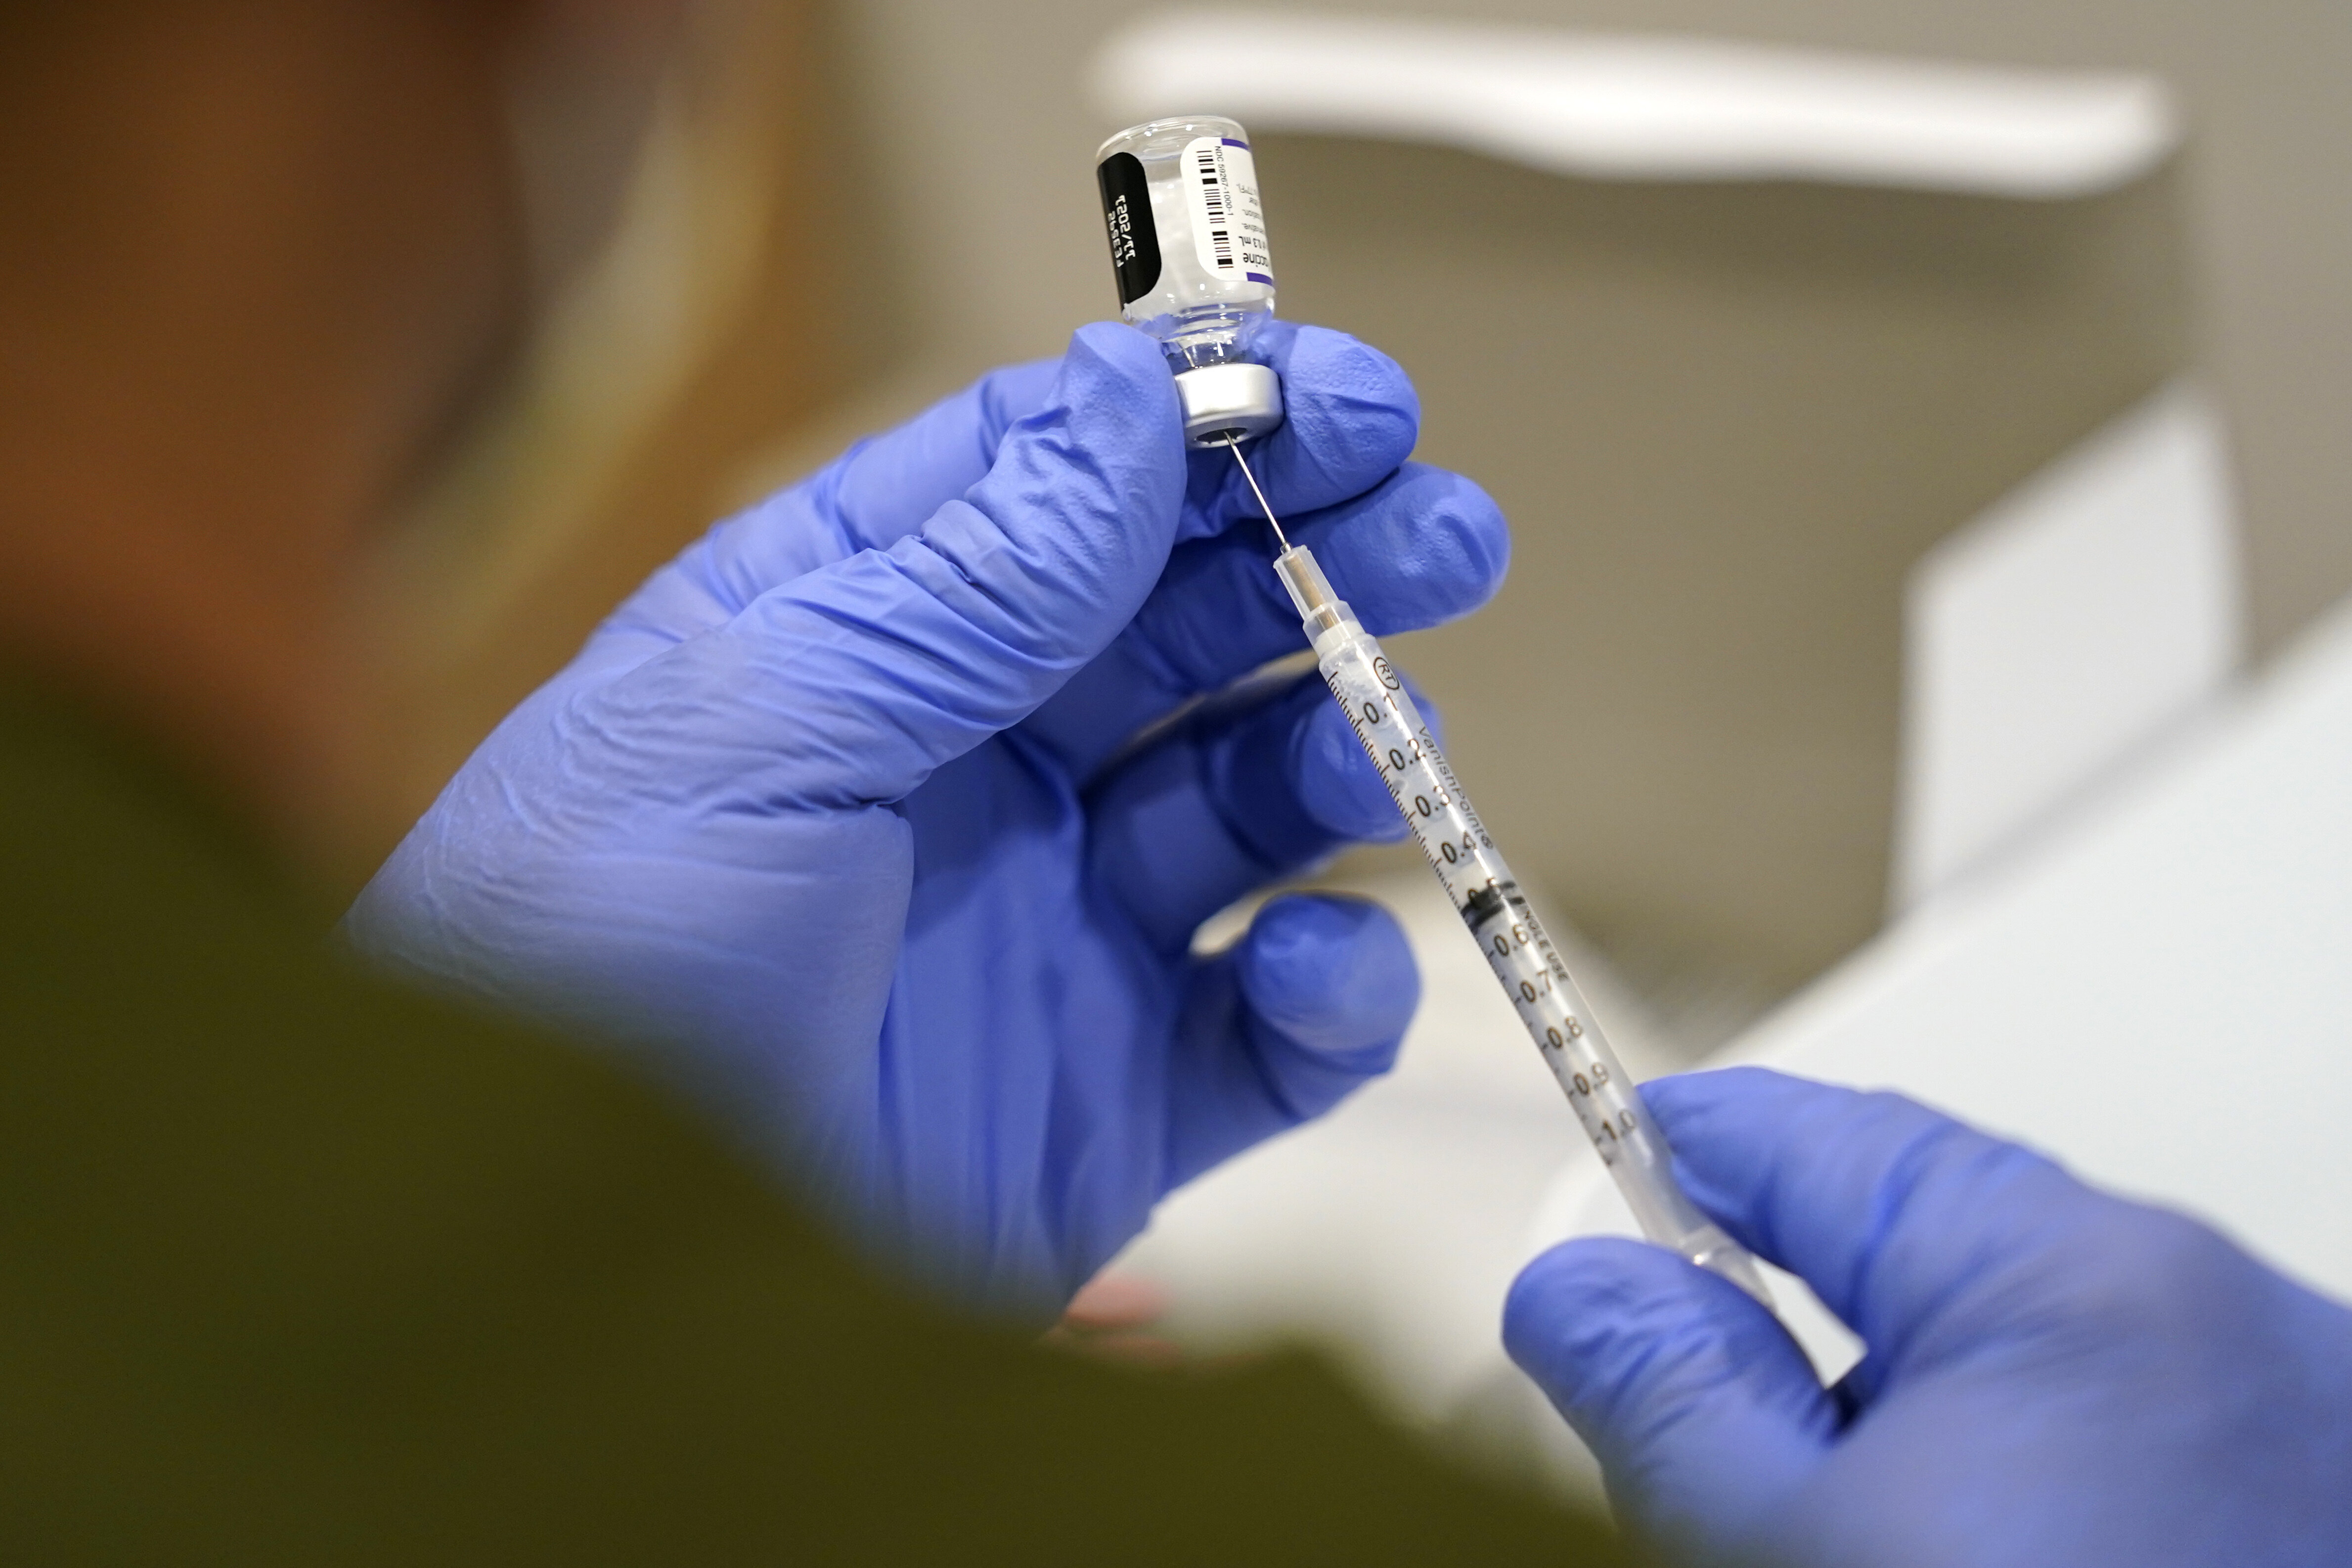 A healthcare worker fills a syringe with the Pfizer COVID-19 vaccine at Jackson Memorial Hospital in Miami. The man studied in Germany said he received the vaccination 217 times, though only 134 of those instances were proven by local officials.